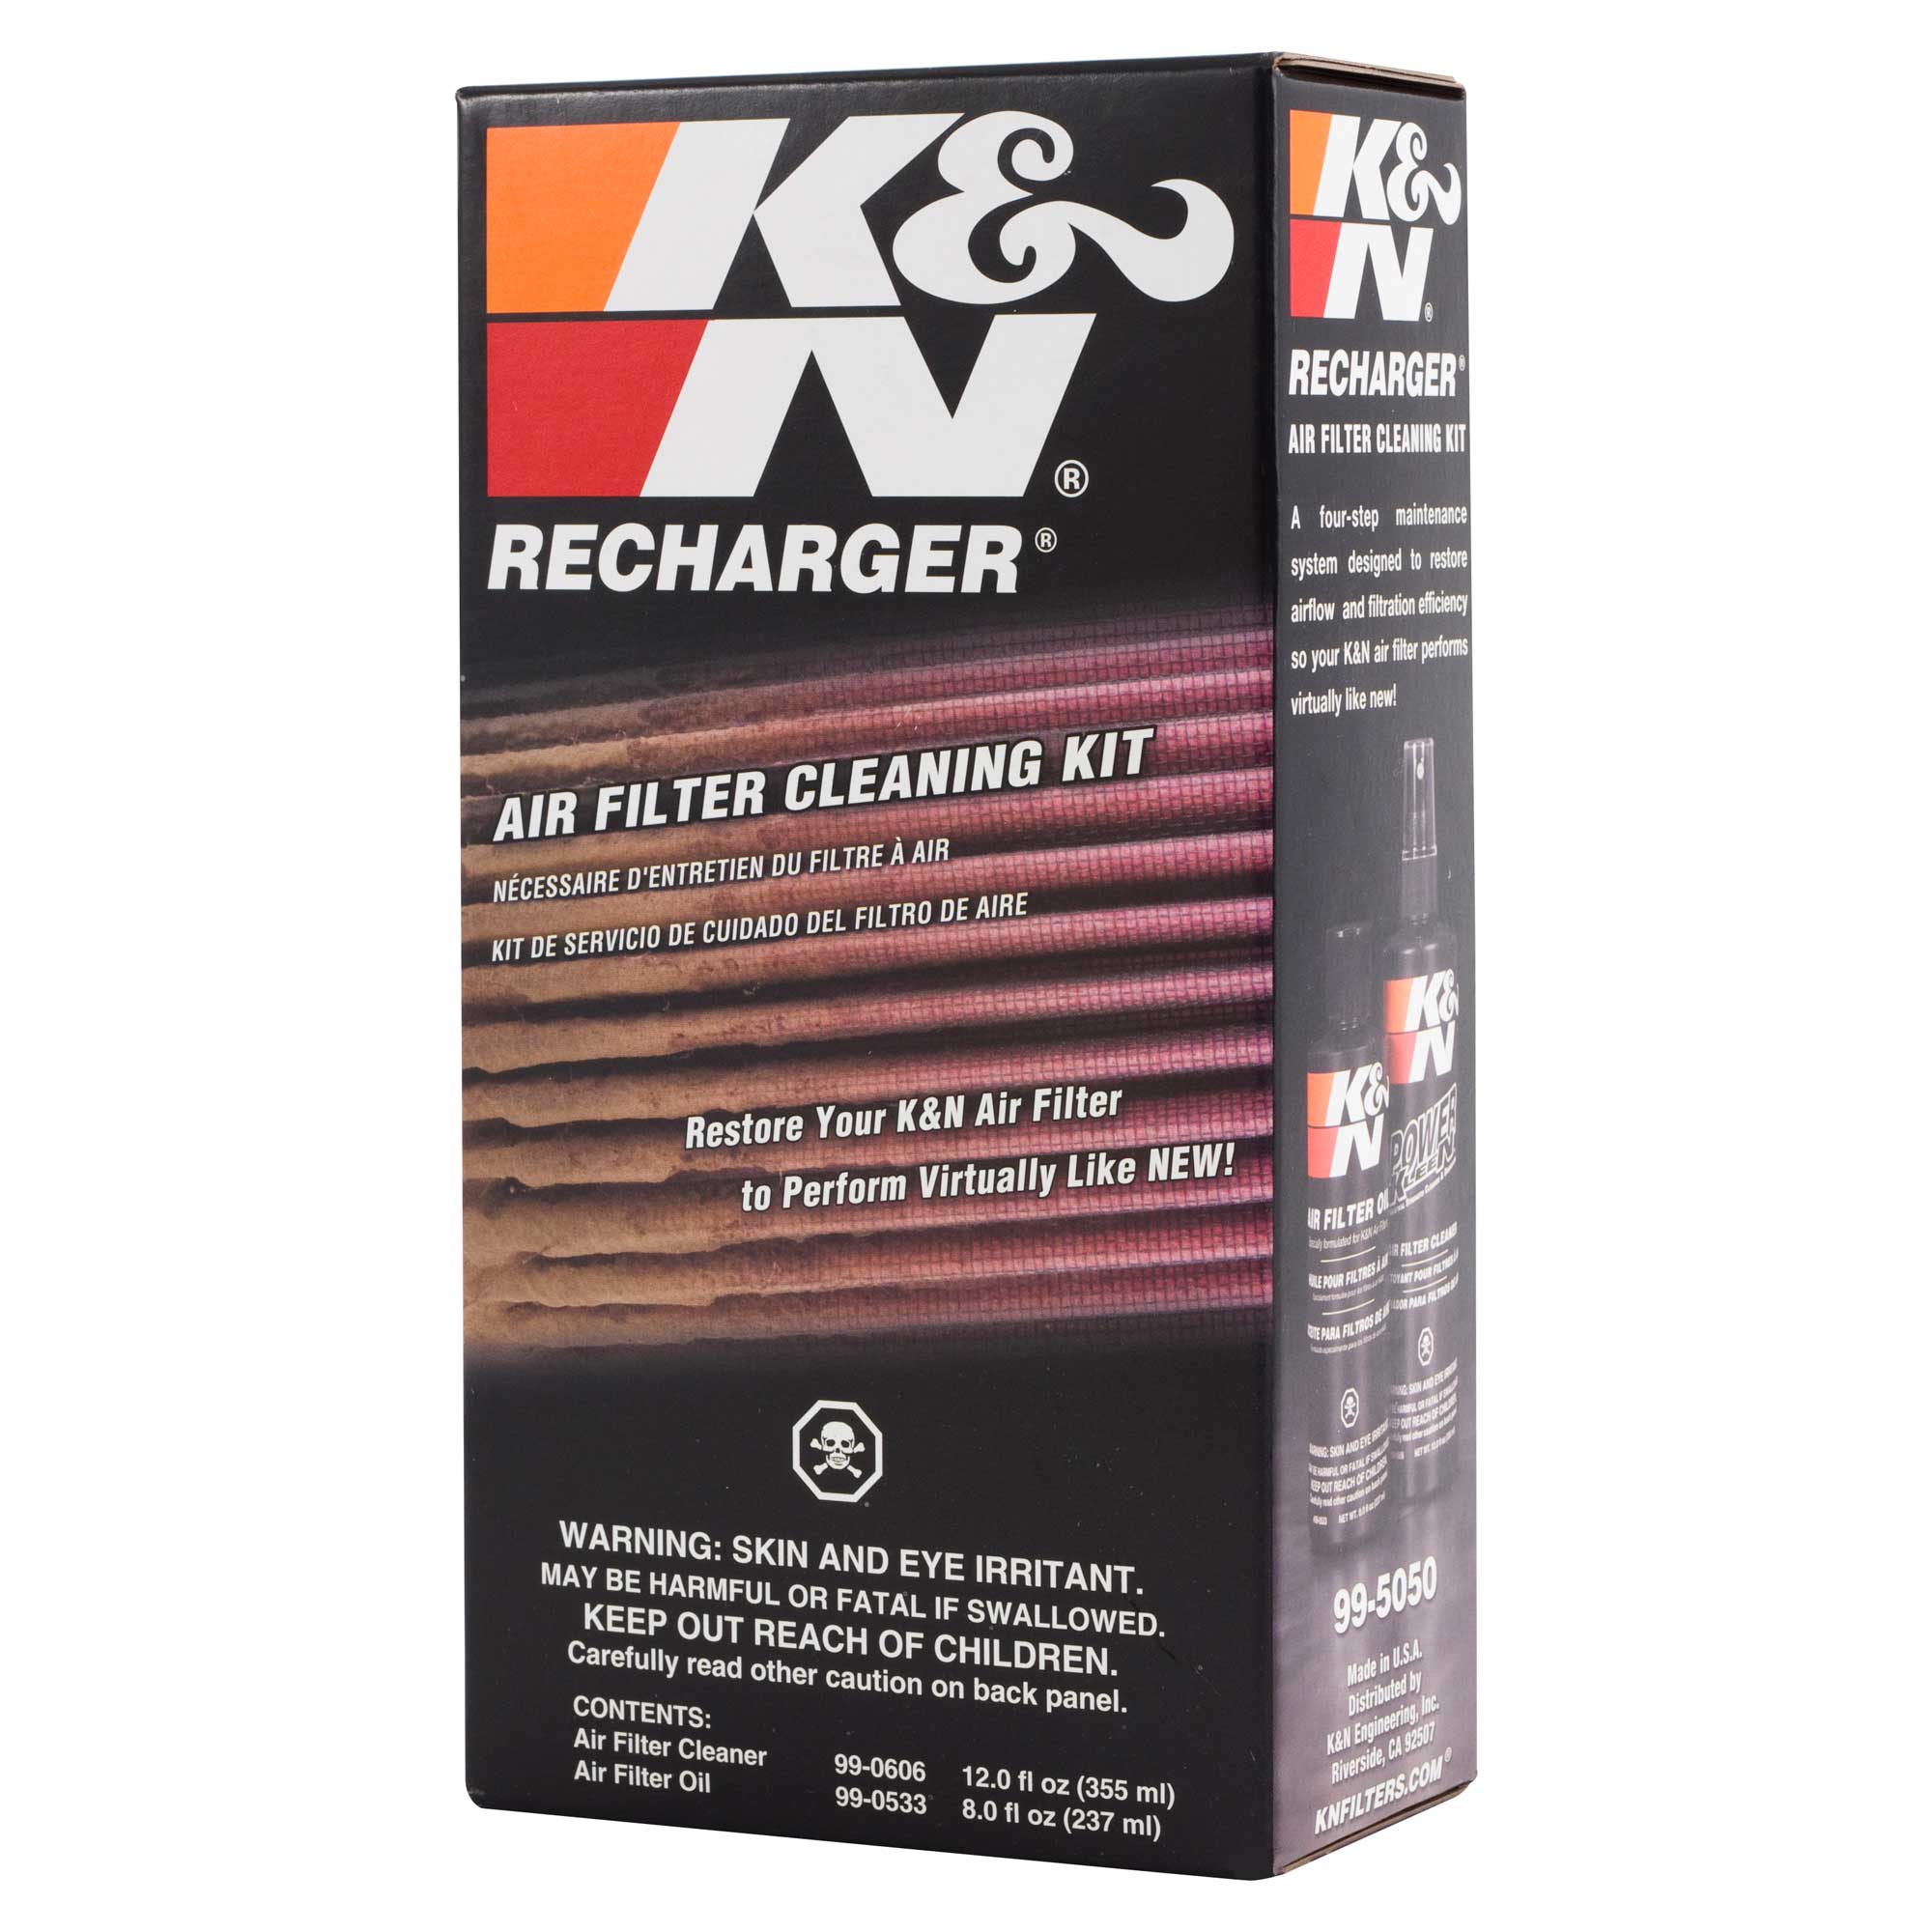 K&N Filters Air Filter Service / Recharger Kit (Red) - Cleaner & Oil  (99-5050) 24844112743